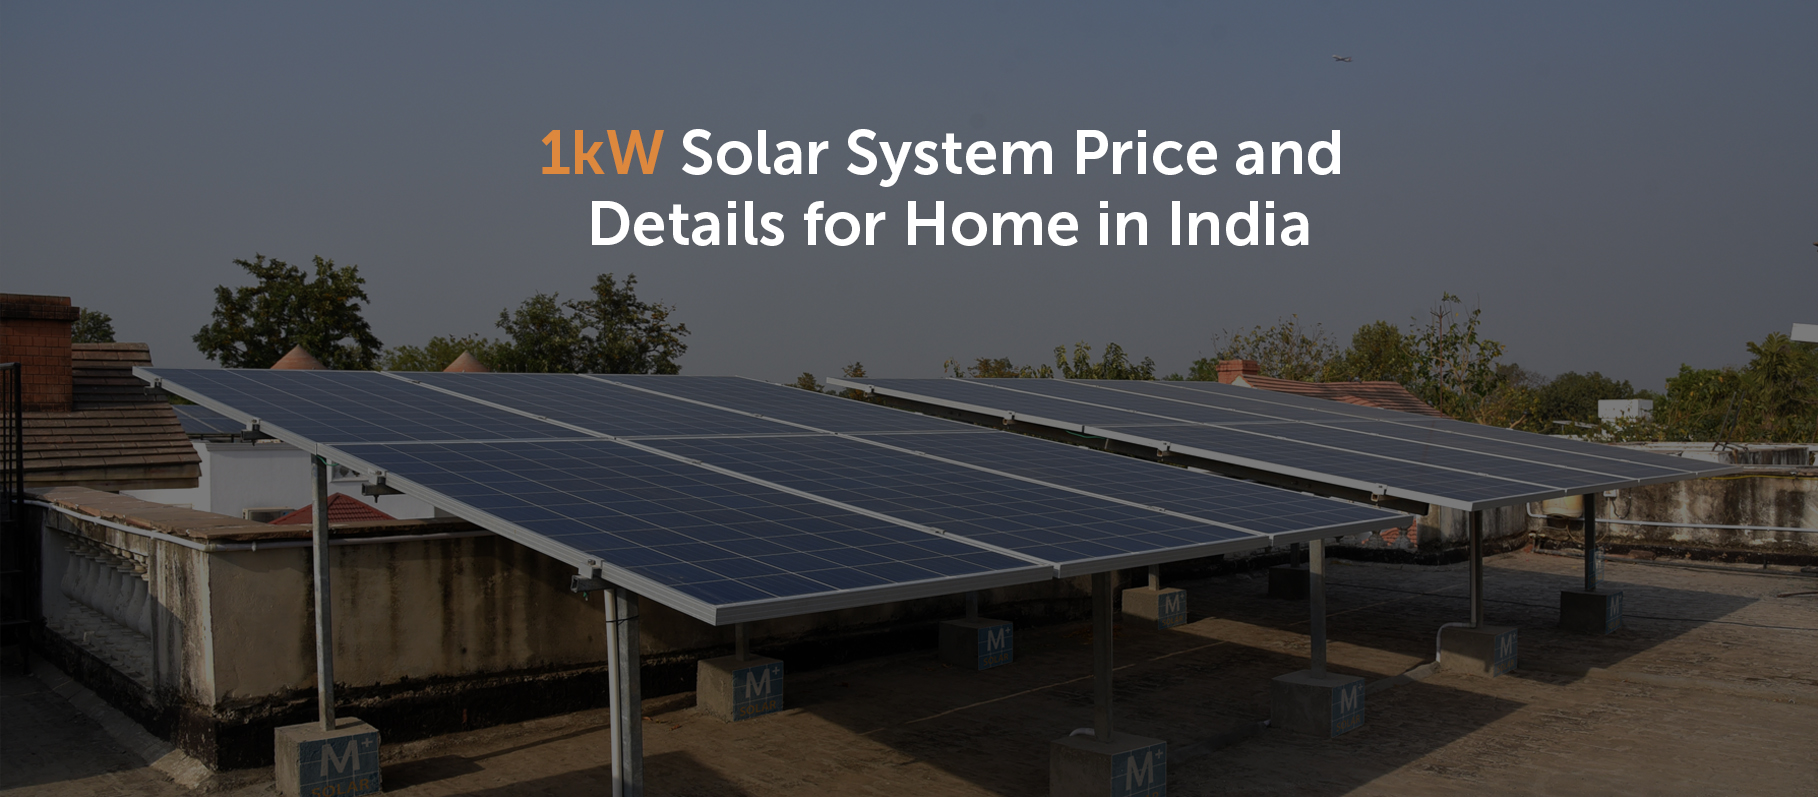 1kW solar system for home